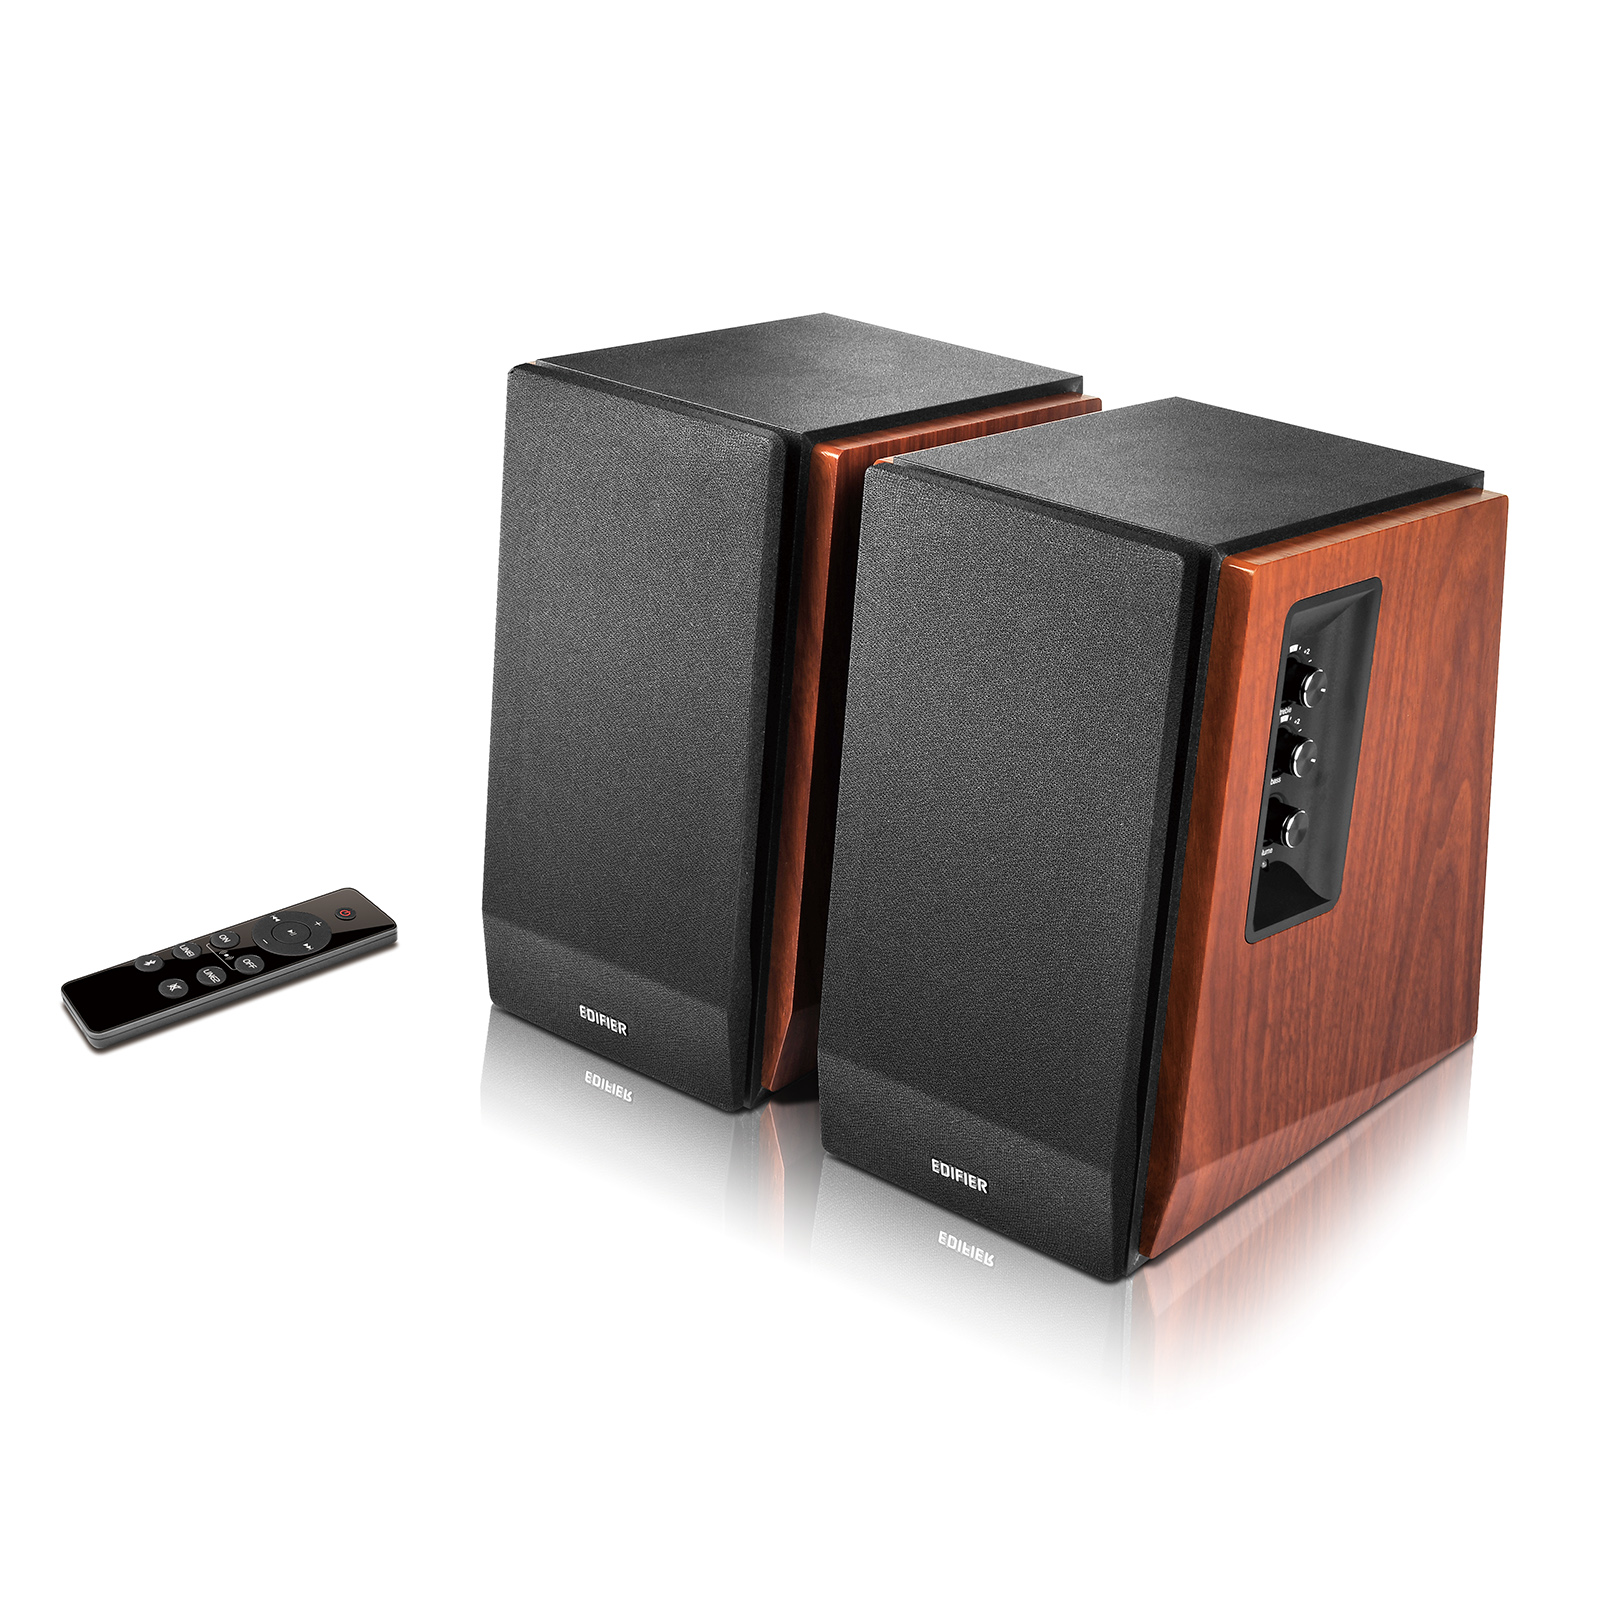 Edifier R1700BTs Active Bookshelf Speakers - Bluetooth v5.0, 2.0 Wireless Near Field Studio Monitor Speaker - 66w RMS with Subwoofer Line Out - Wooden Enclosure - image 3 of 7